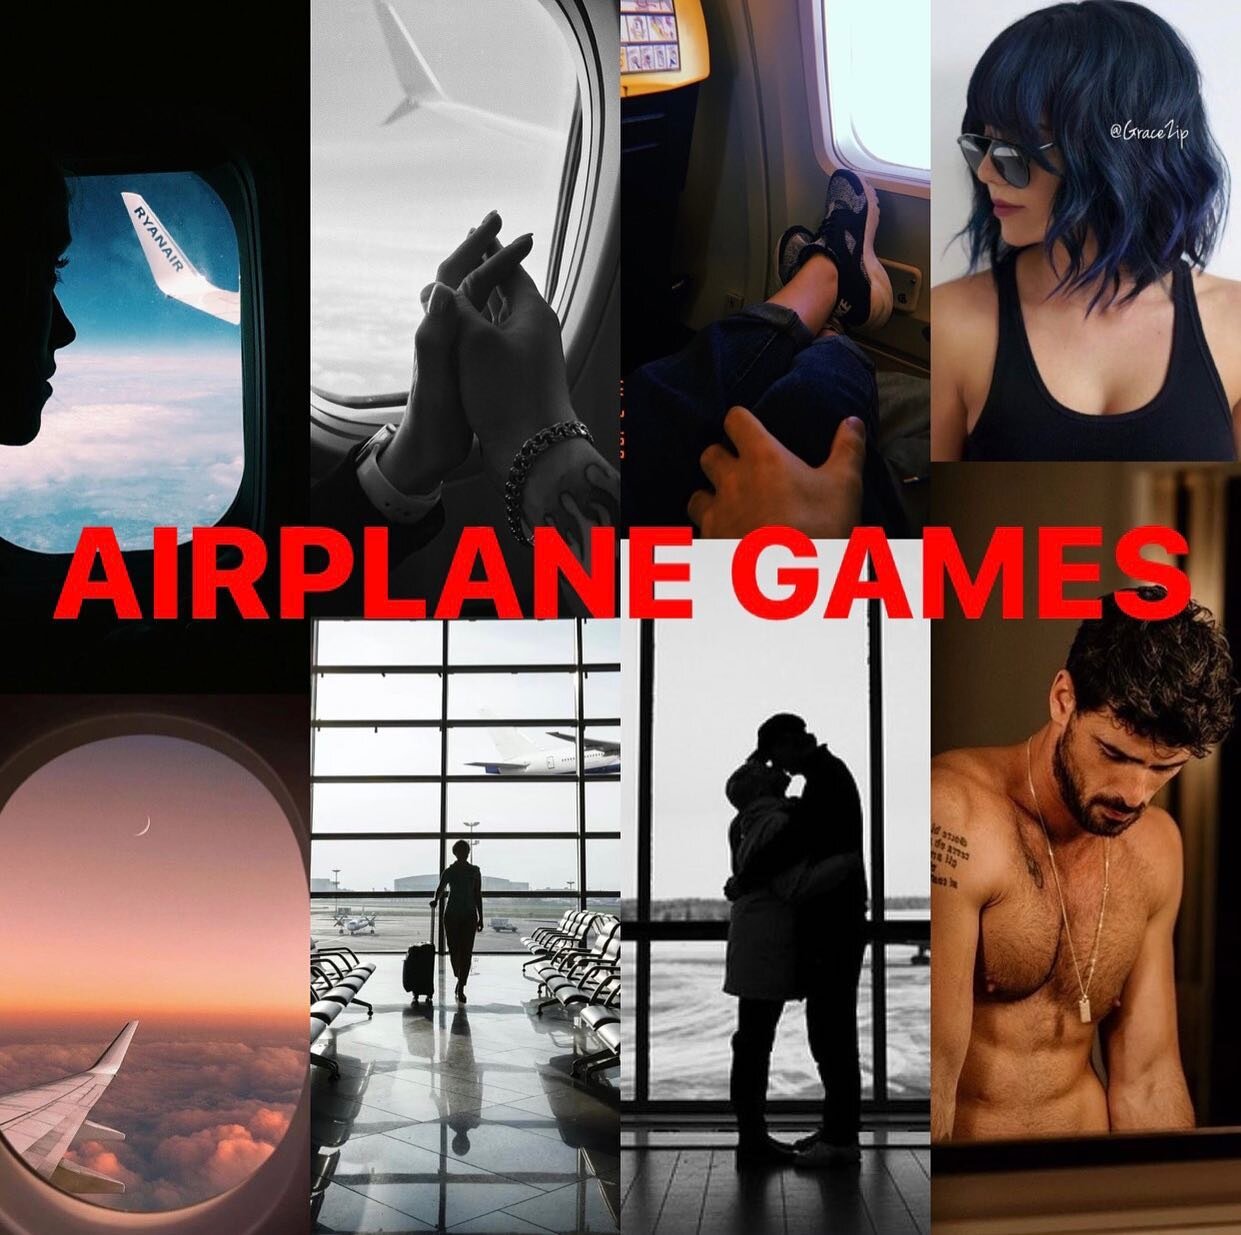 ✈️AIRPLANE GAMES✈️ by Cat Wynn

Landing on your Kindle April 18th!

Parker Donne wants to plant his feet on the ground, get married and start a family. Unfortunately his niche industry job as a high-end traveling mechanic keeps him wealthy but airbor